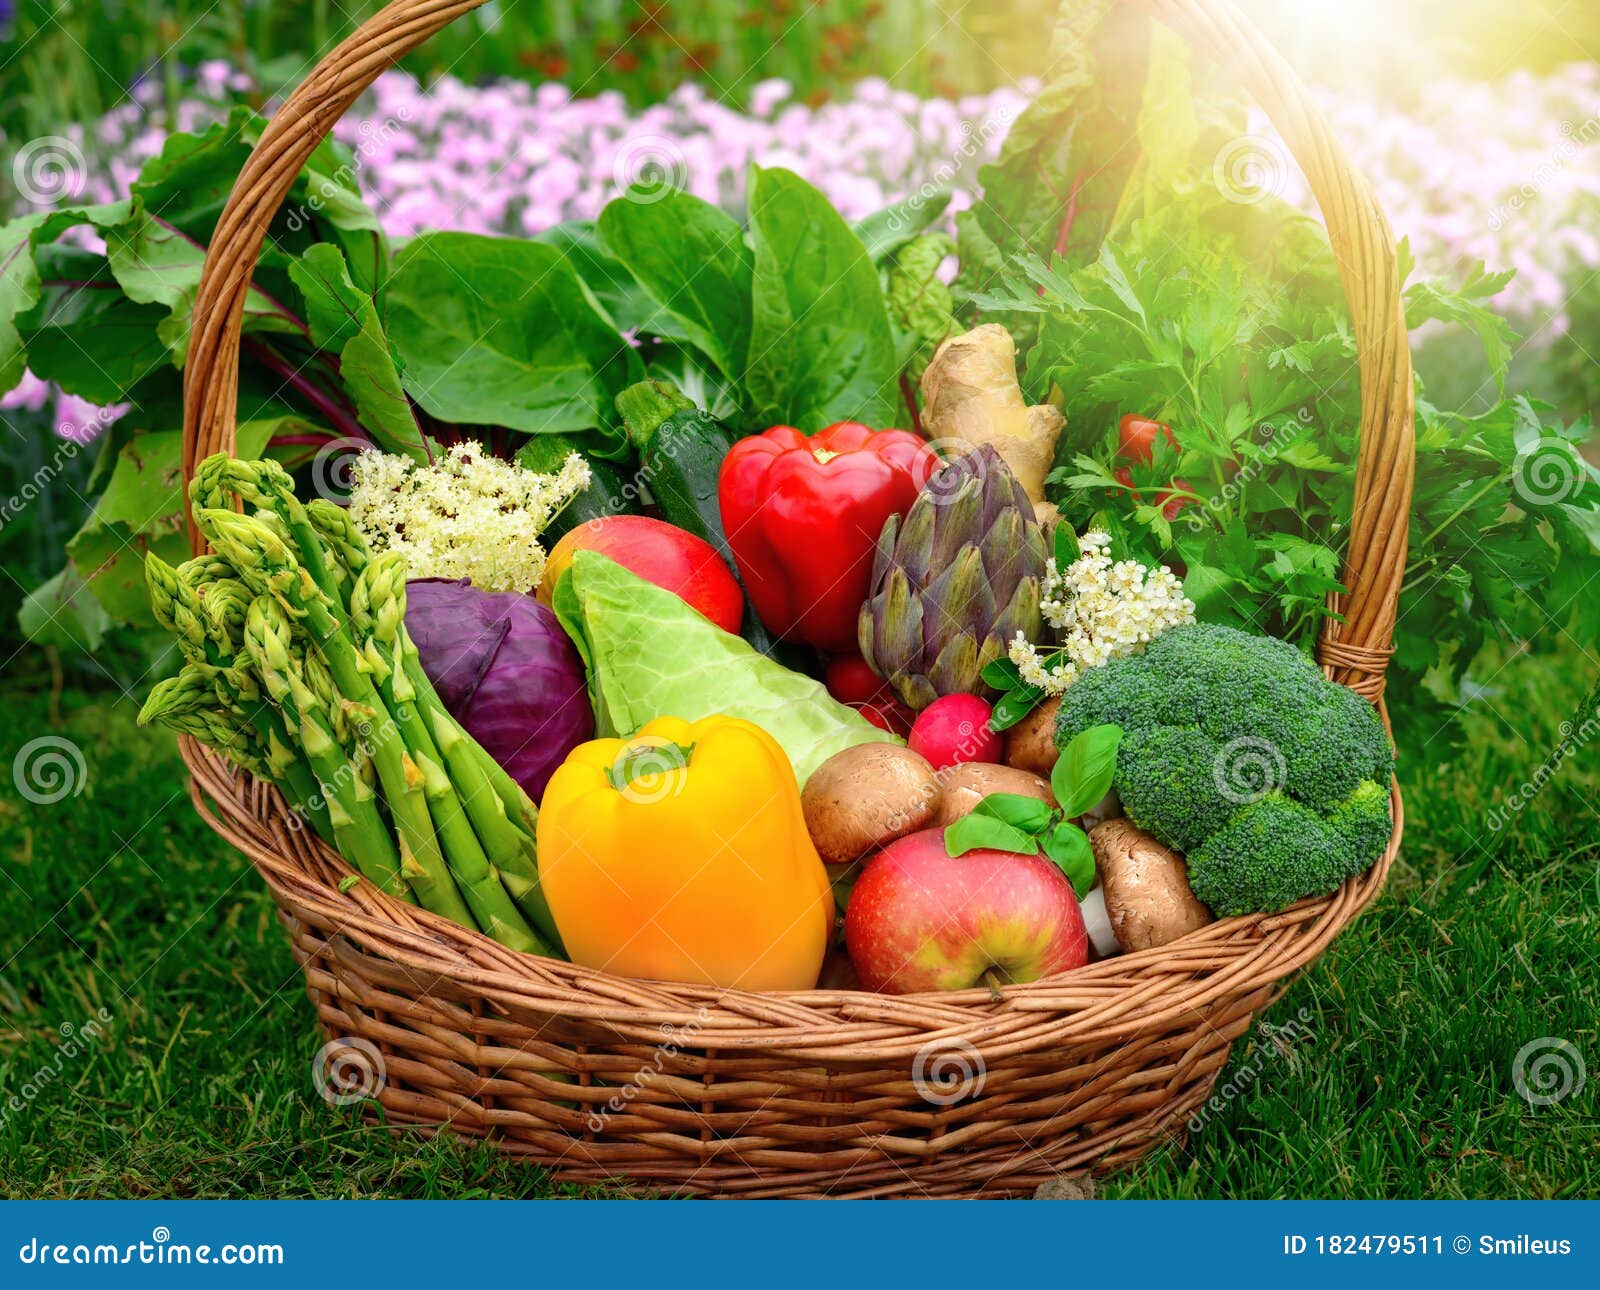 Colorful Vegetables And Fruits In A Basket Stock Image Image Of